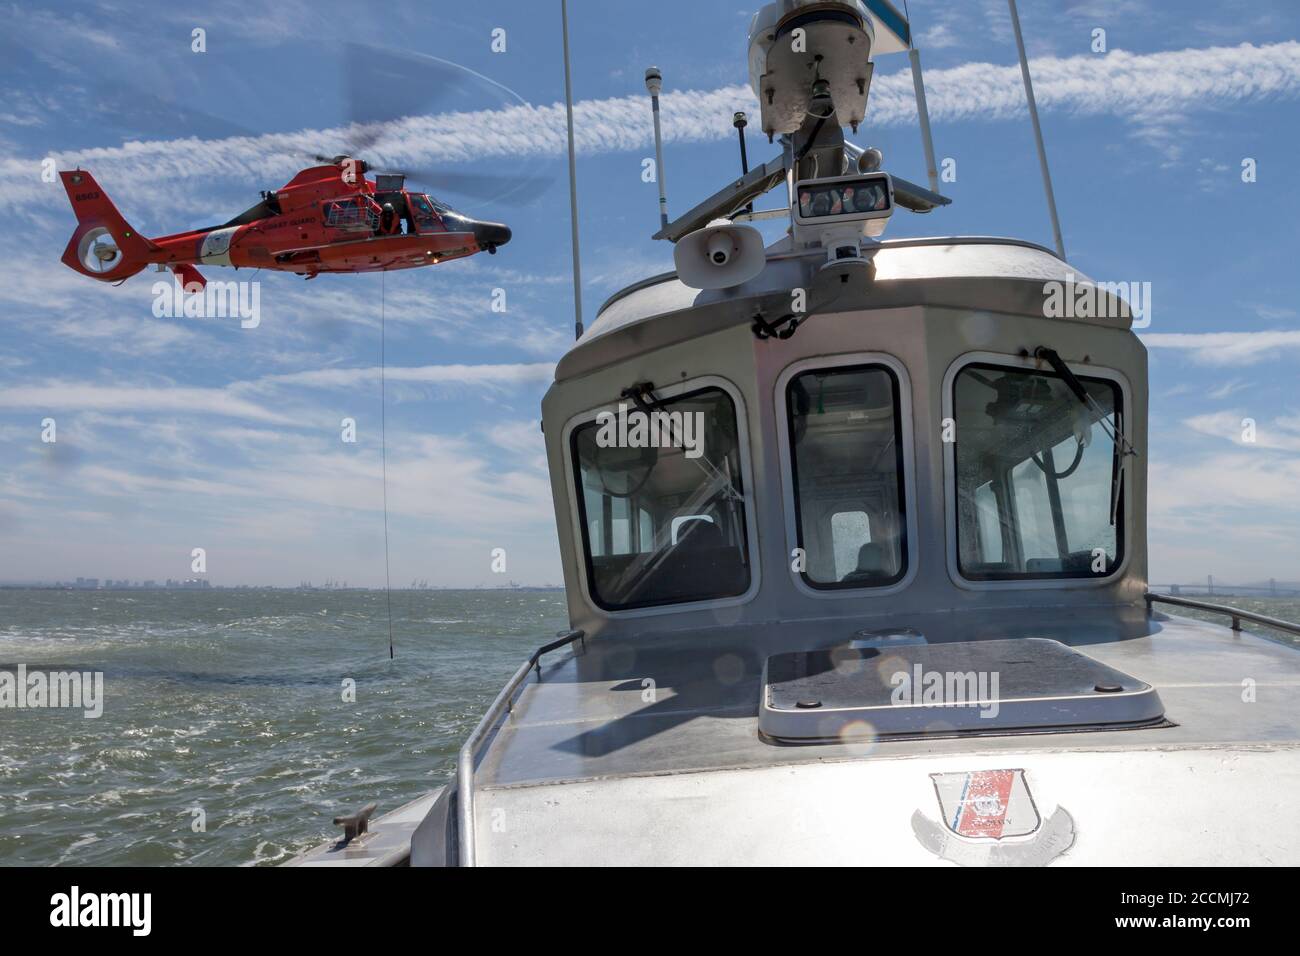 A trail line is lowered from a USCG MH-65 Dolphin helicopter as it approaches the USCG Auxiliary patrol vessel Silver Charm on San Francisco Bay Stock Photo